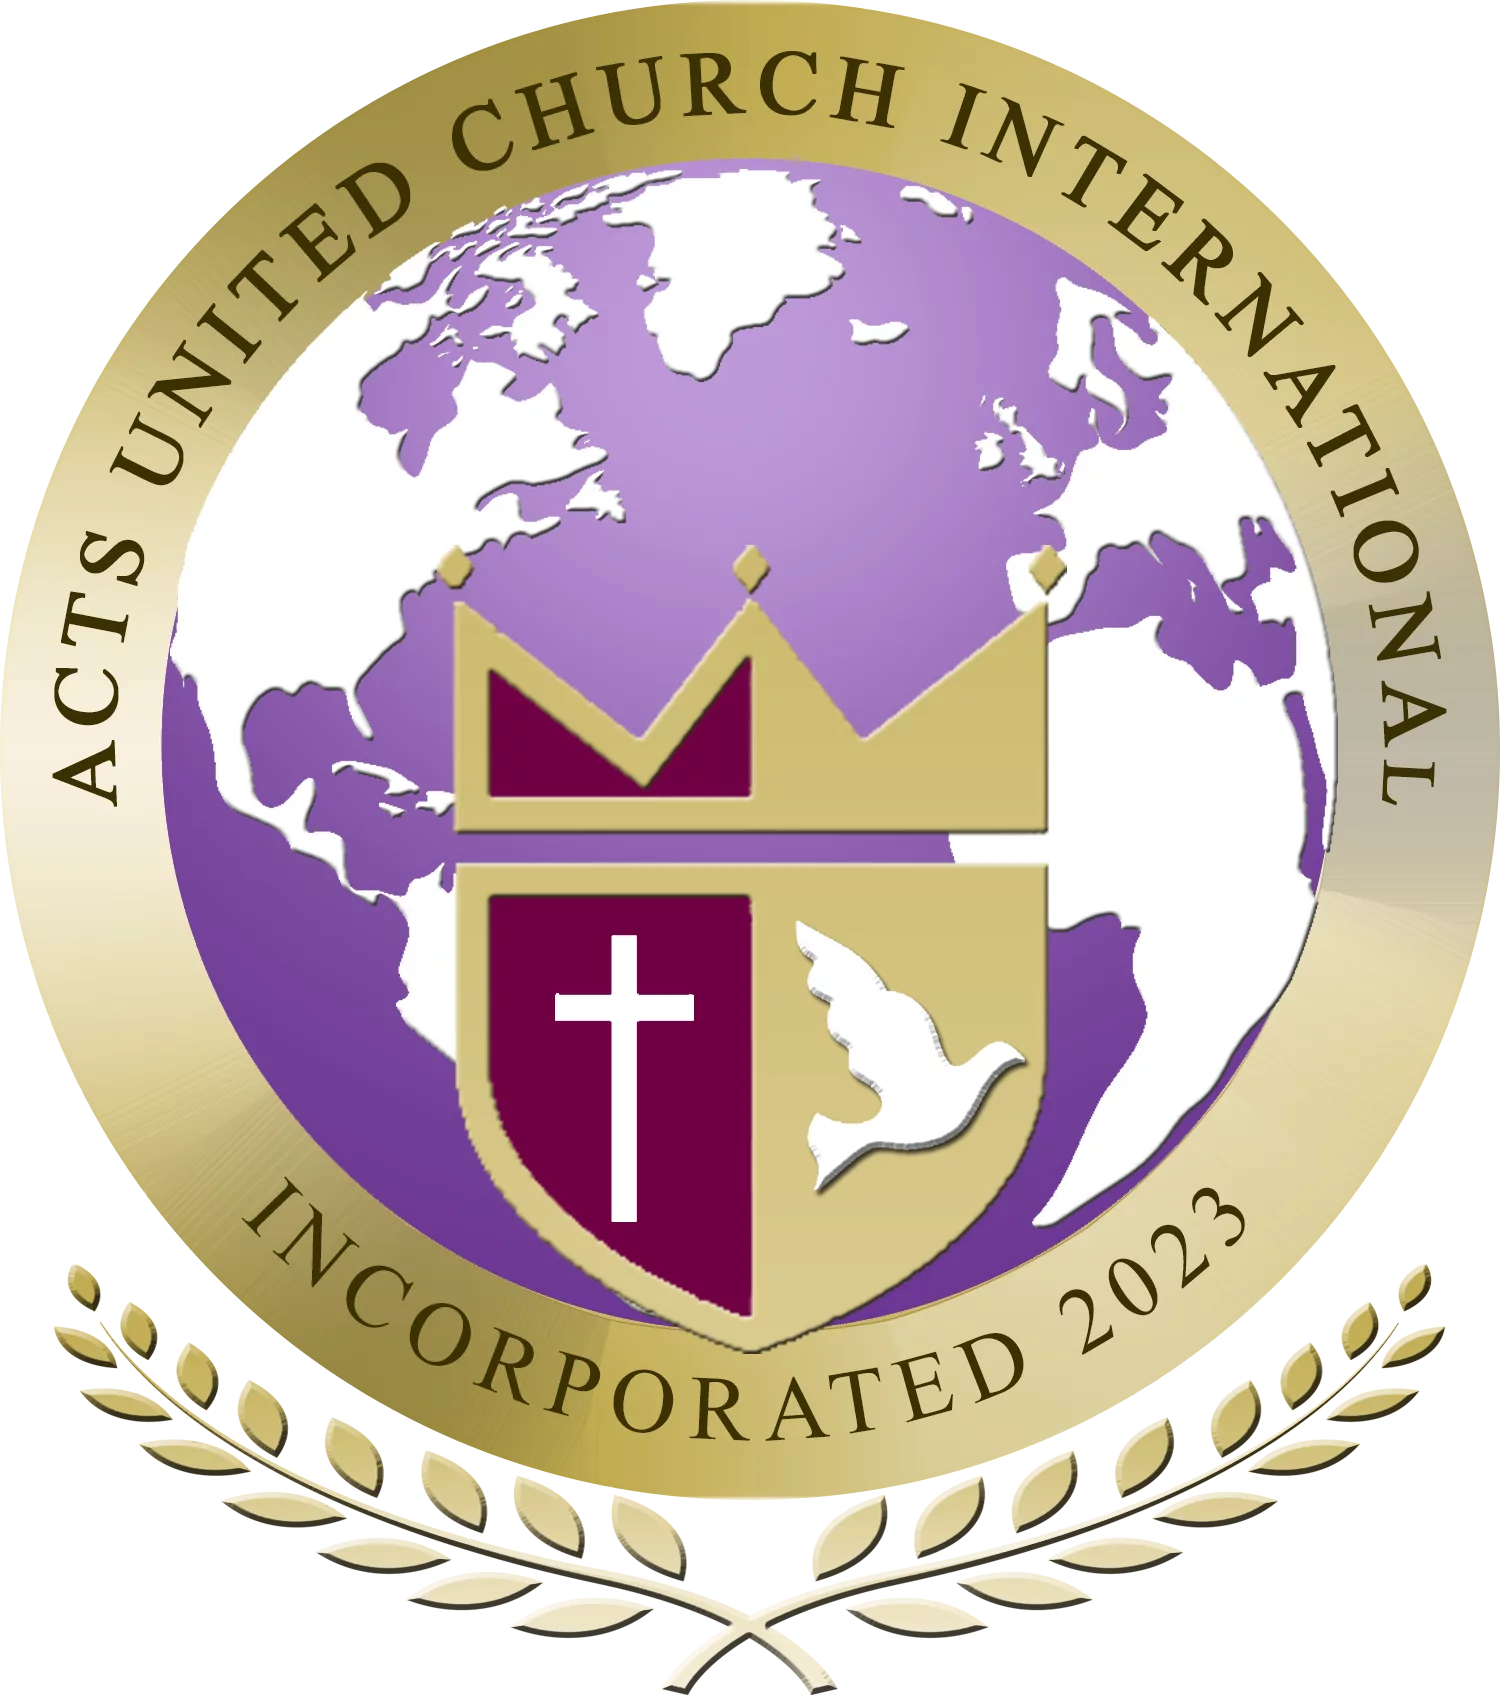 Acts united church international incorporates apostolic beliefs and teachings.